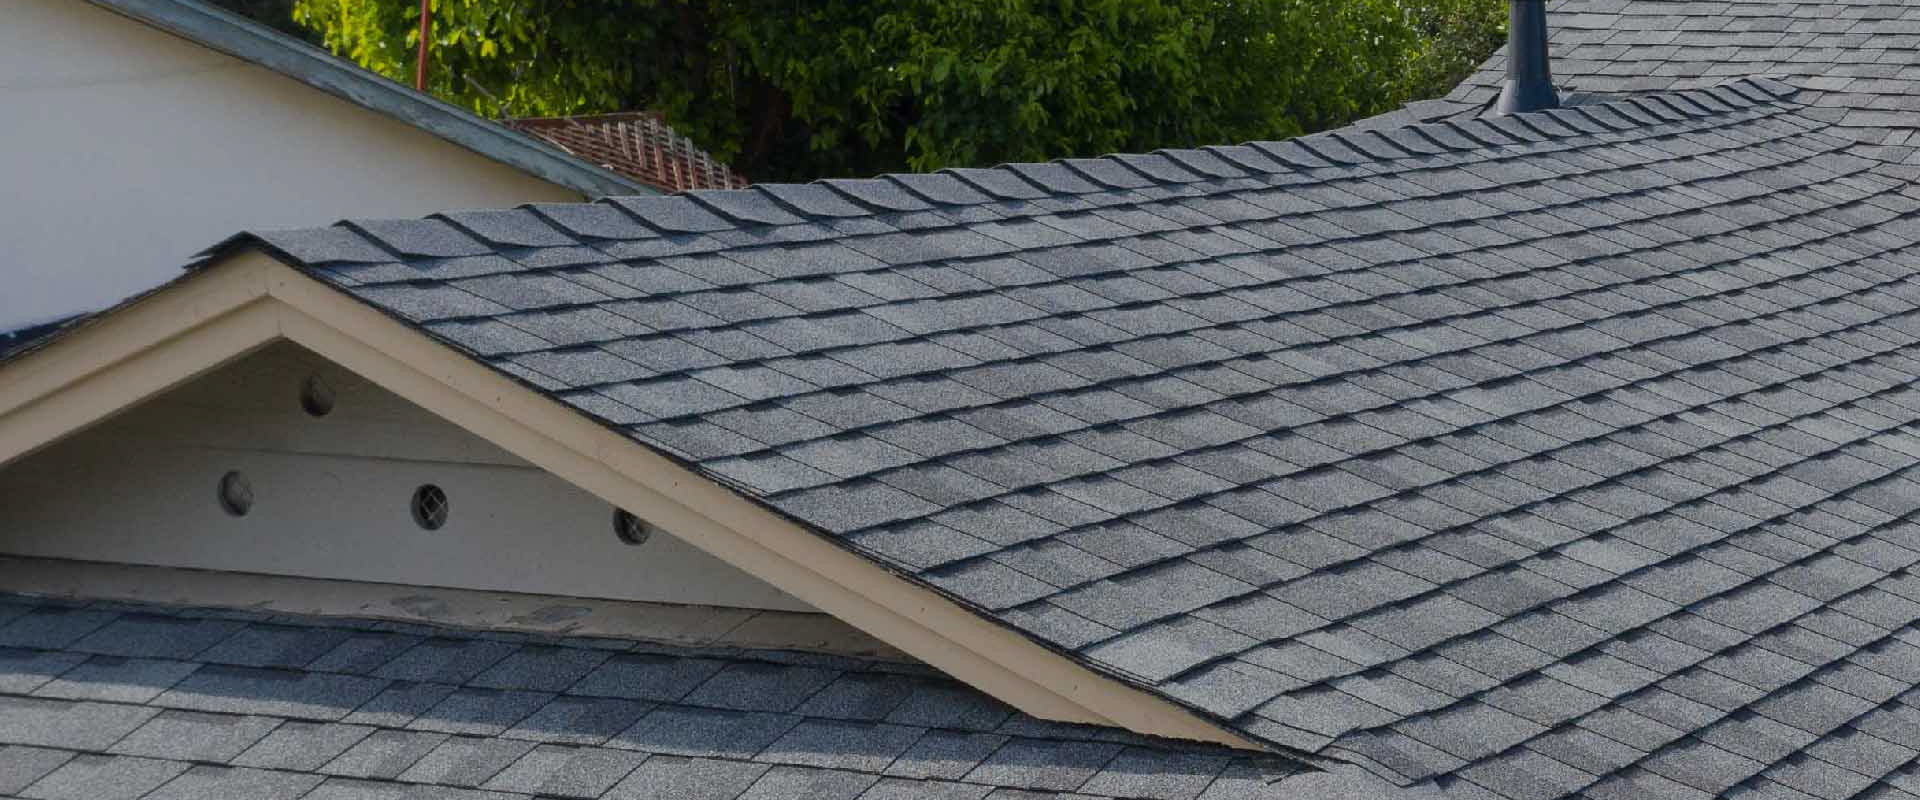 The Rich and Interesting History of Roofing